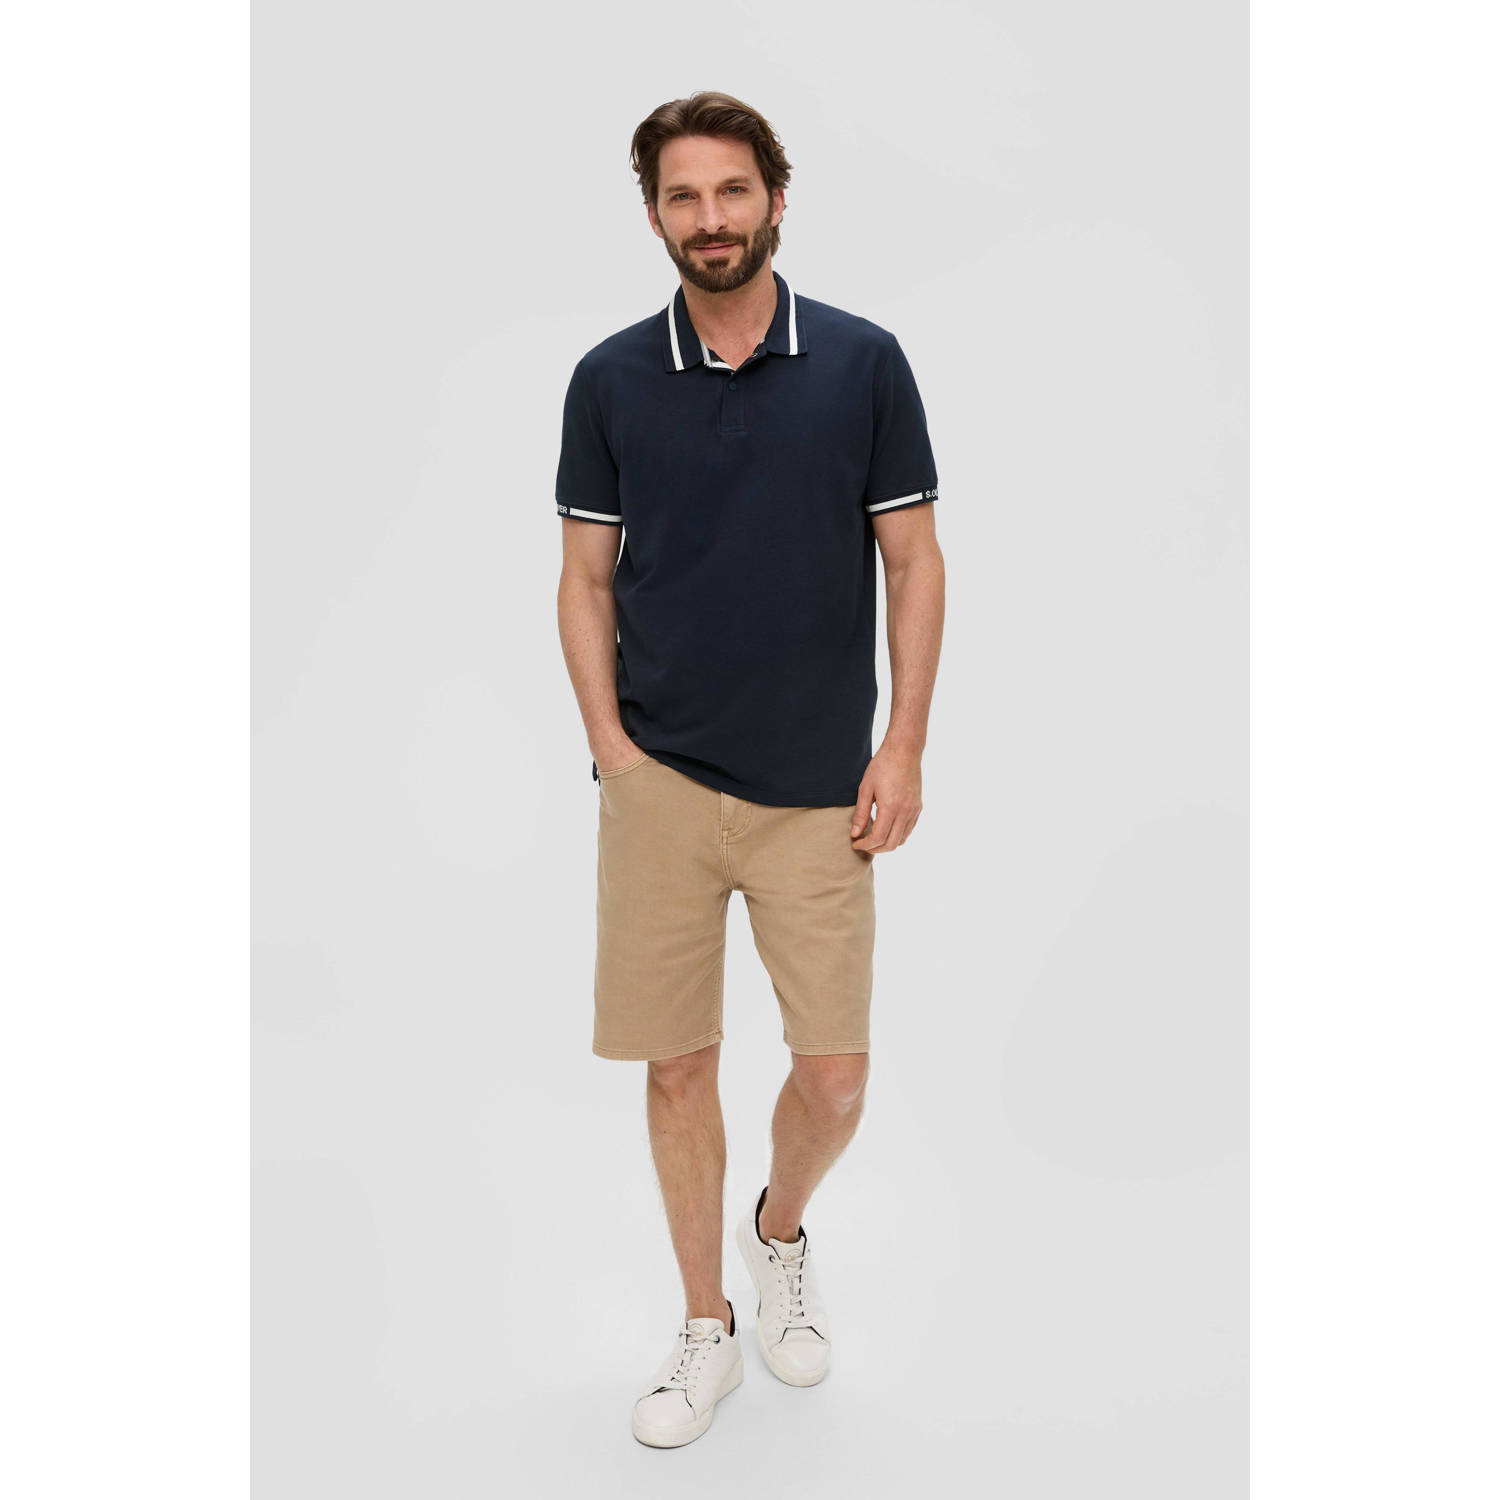 s.Oliver polo donkerblauw wit